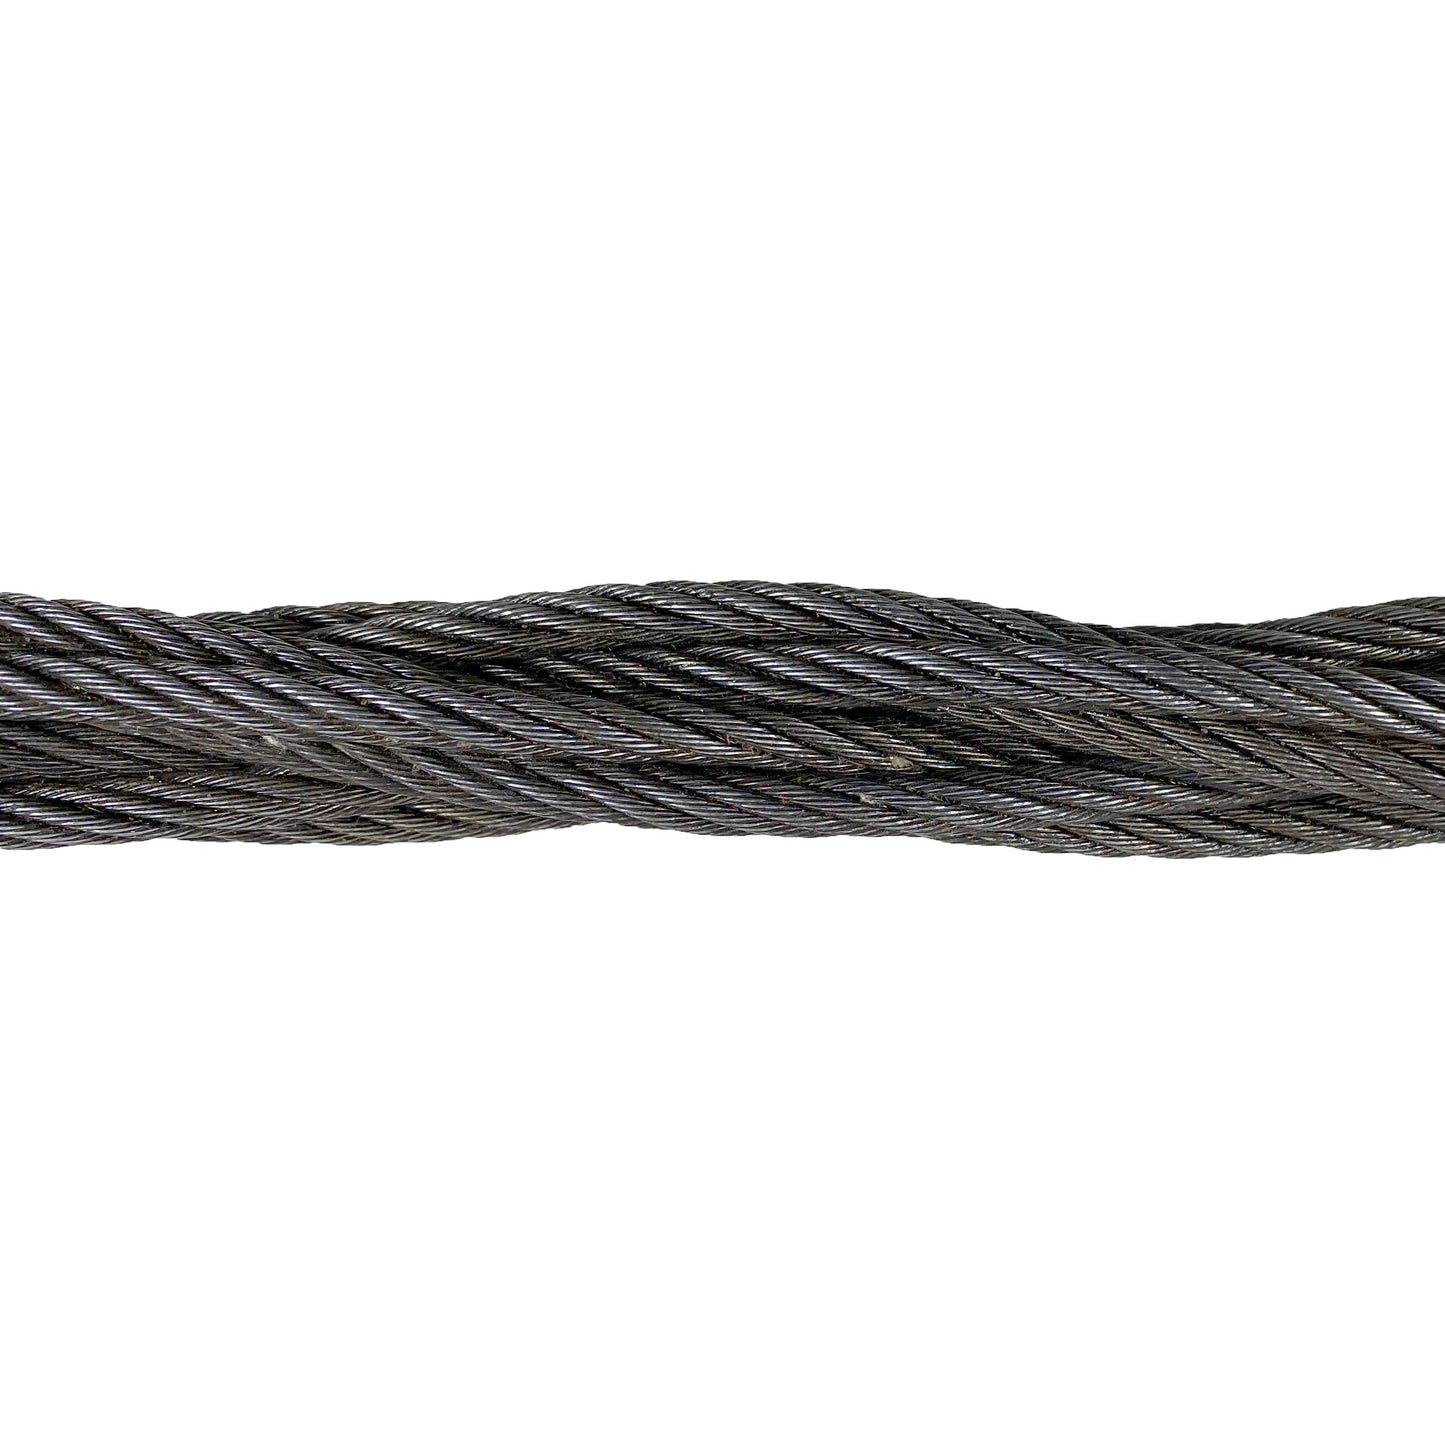 14 inch x 5 foot Nine Part Braided Wire Rope Sling image 3 of 3